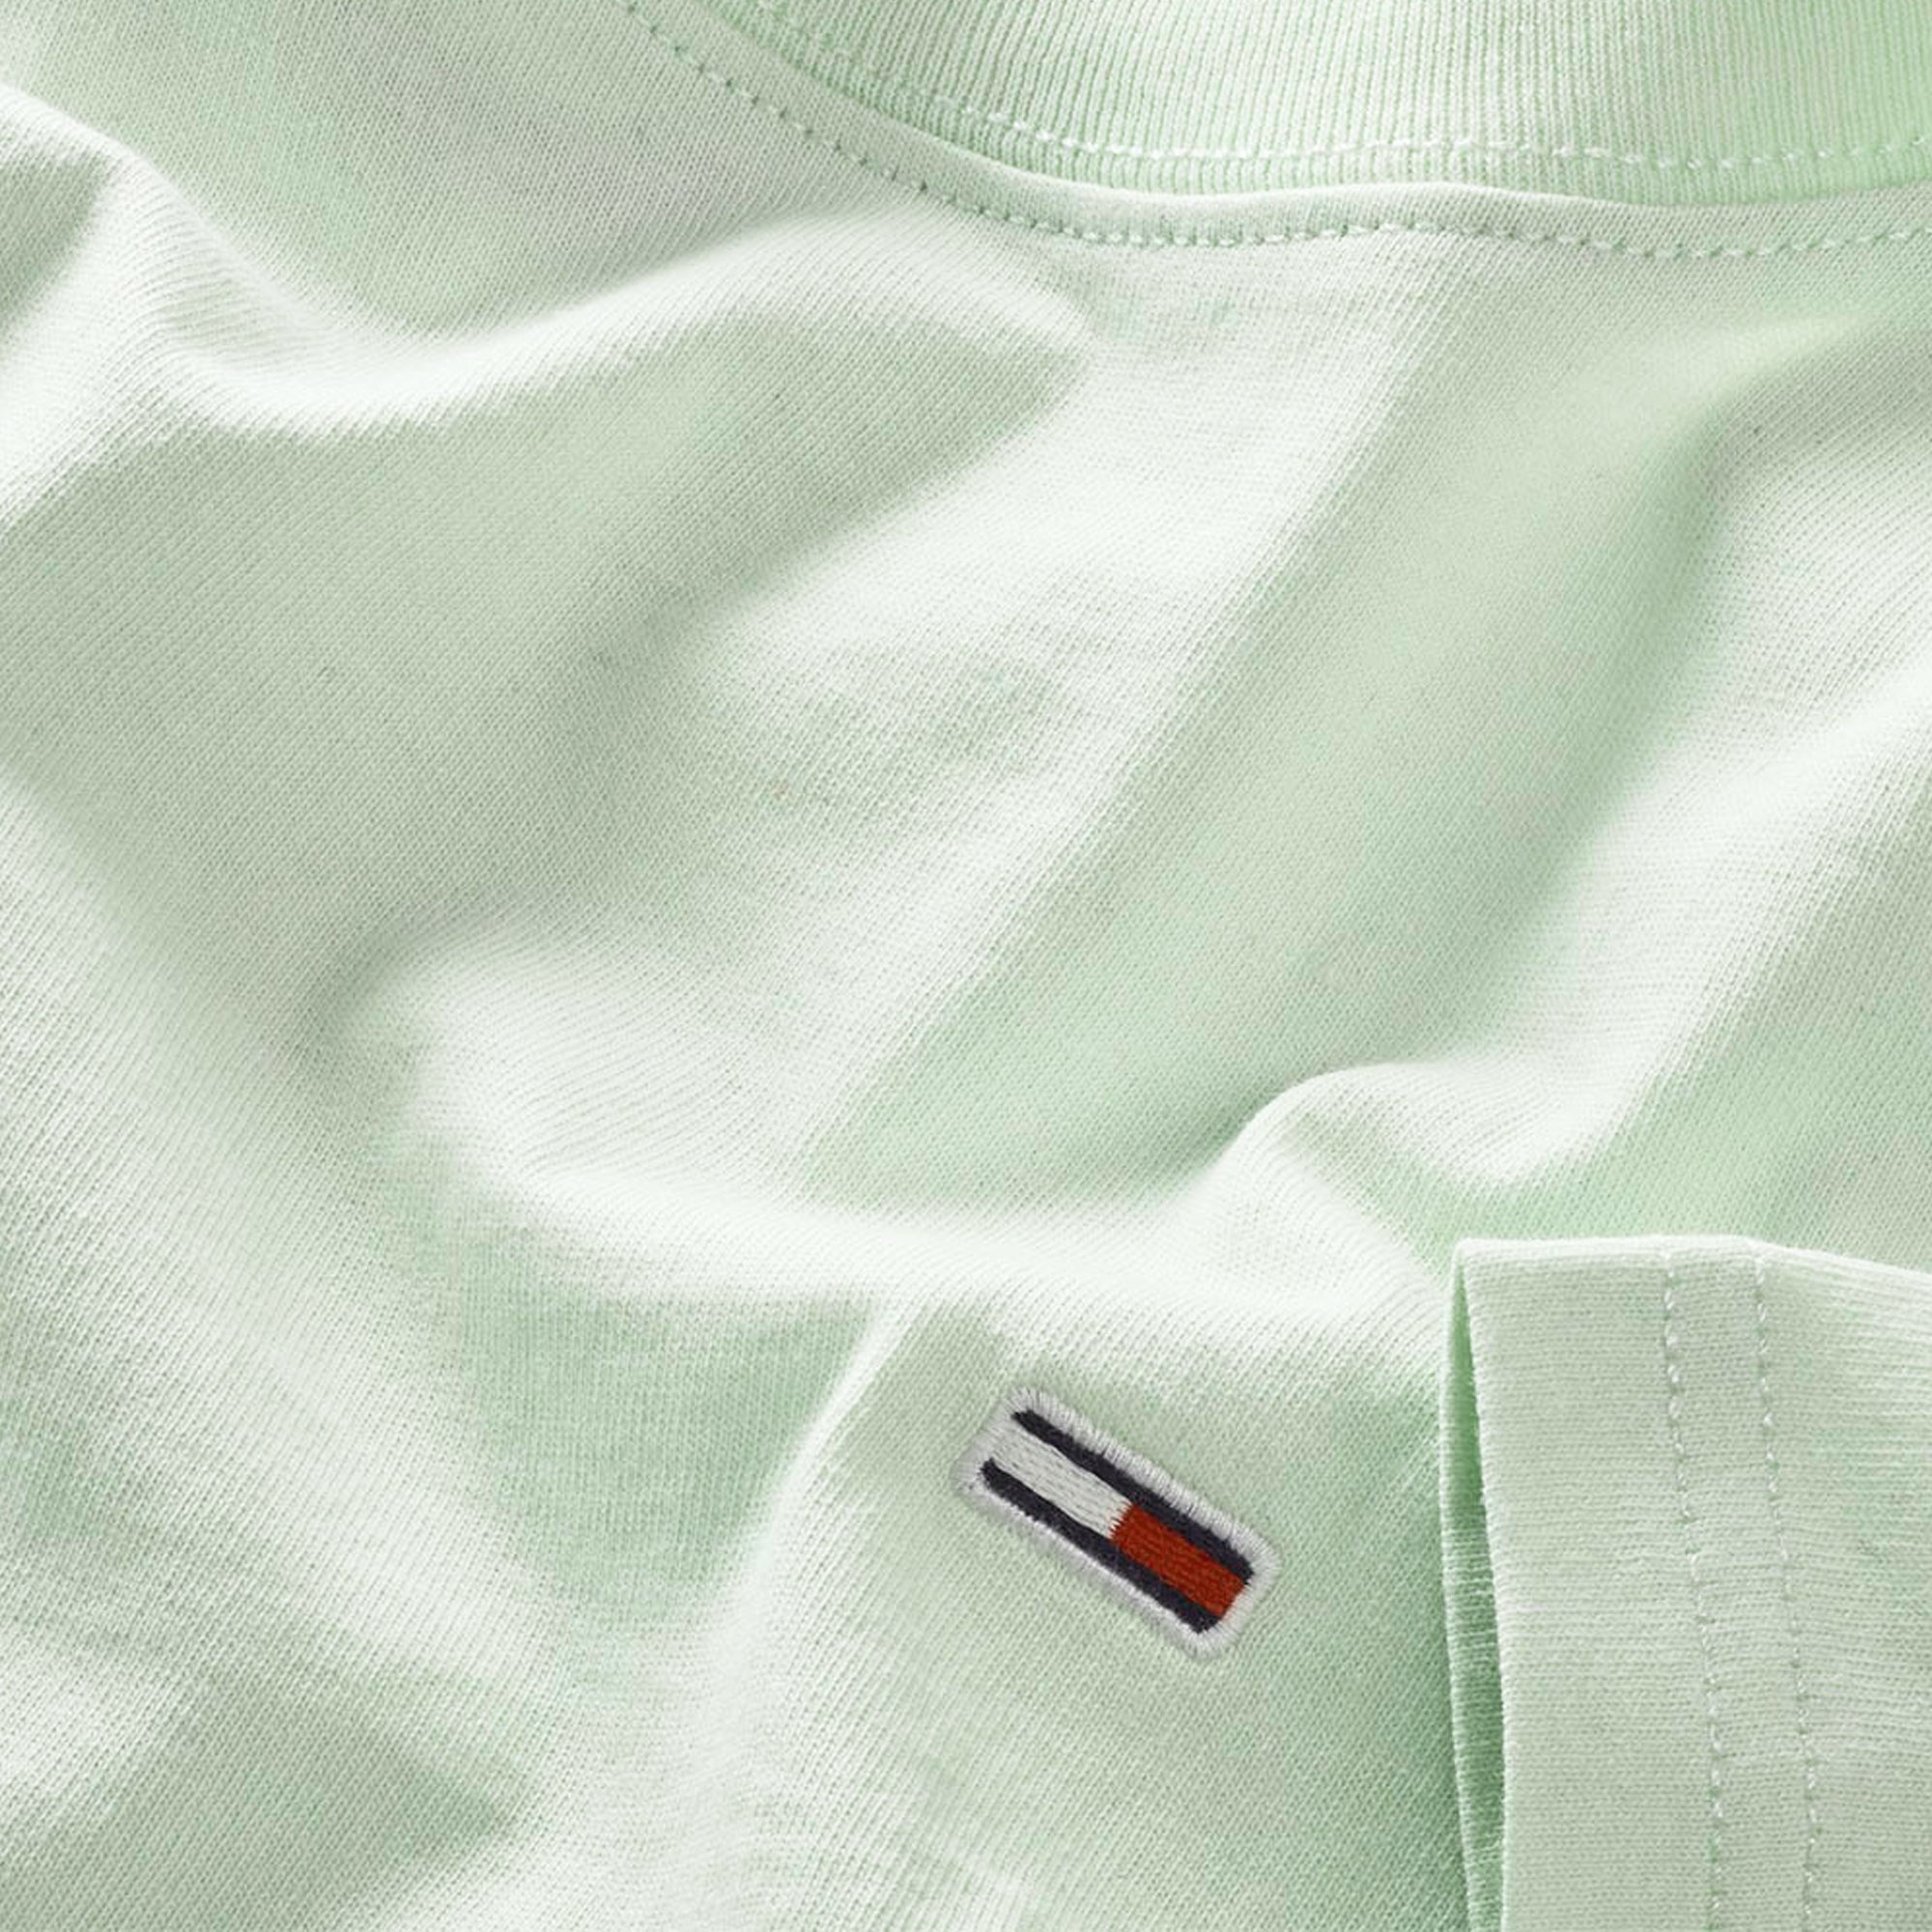 Tommy Jeans Classic Solid Flag T-Shirt - Minty